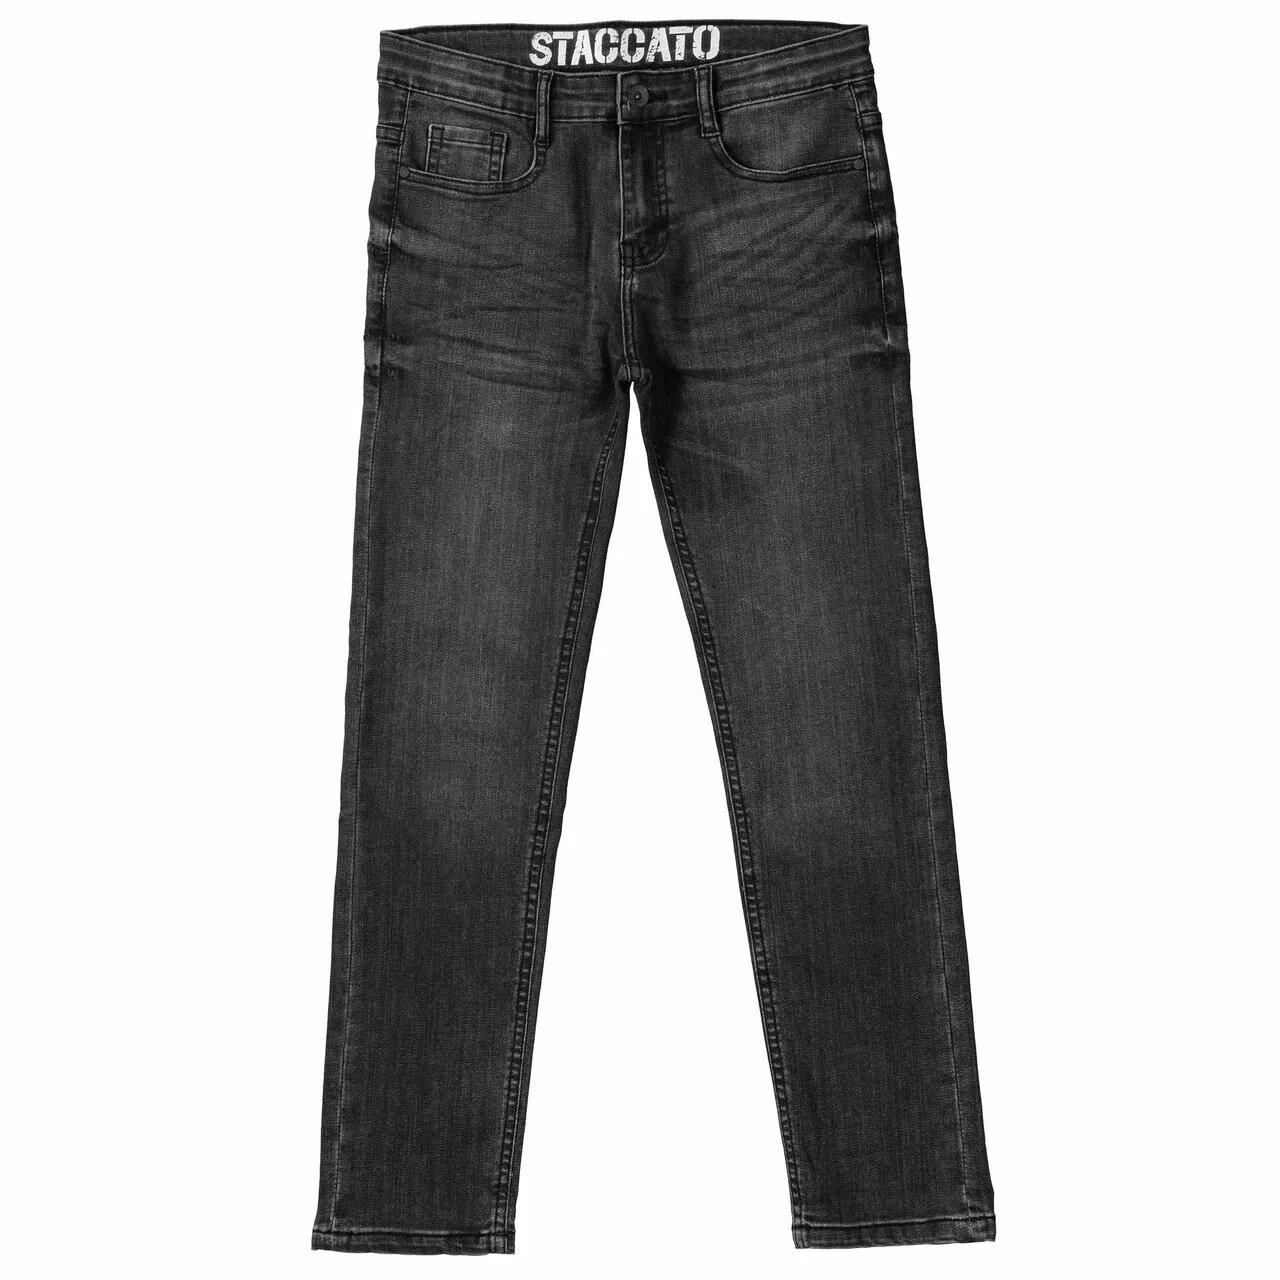 Джинсы  Staccato  Jungen Jeans Kinder Classic Fit